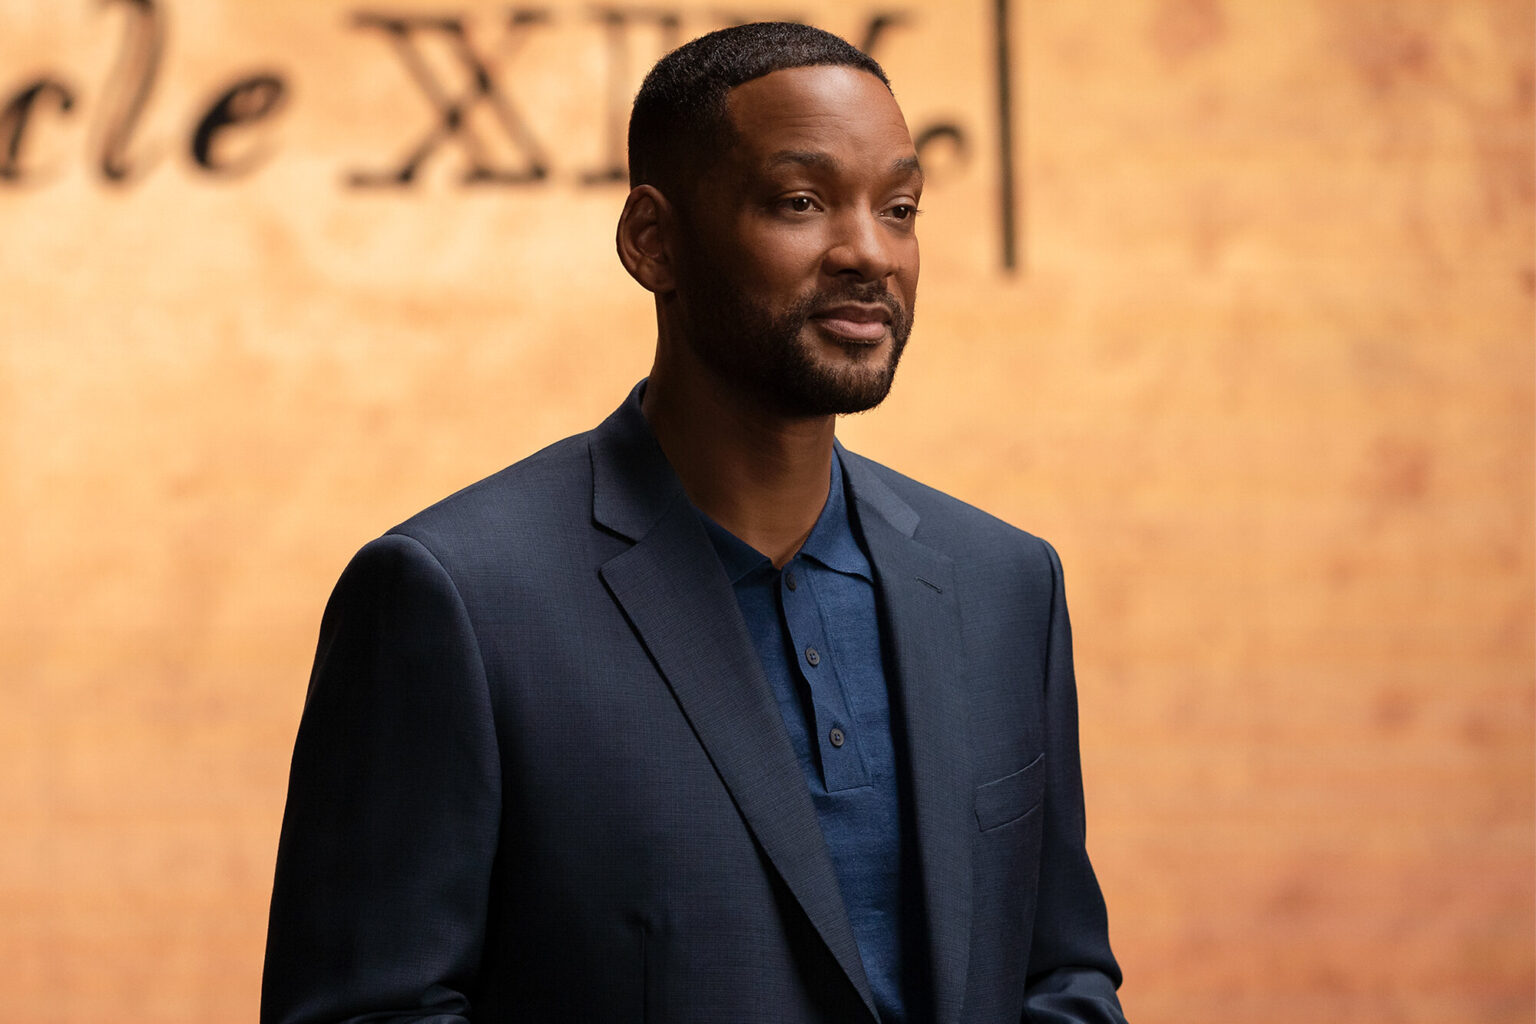 Will Will Smith be the next President or Governator? Here's how the celeb may be putting his net worth into a political run.